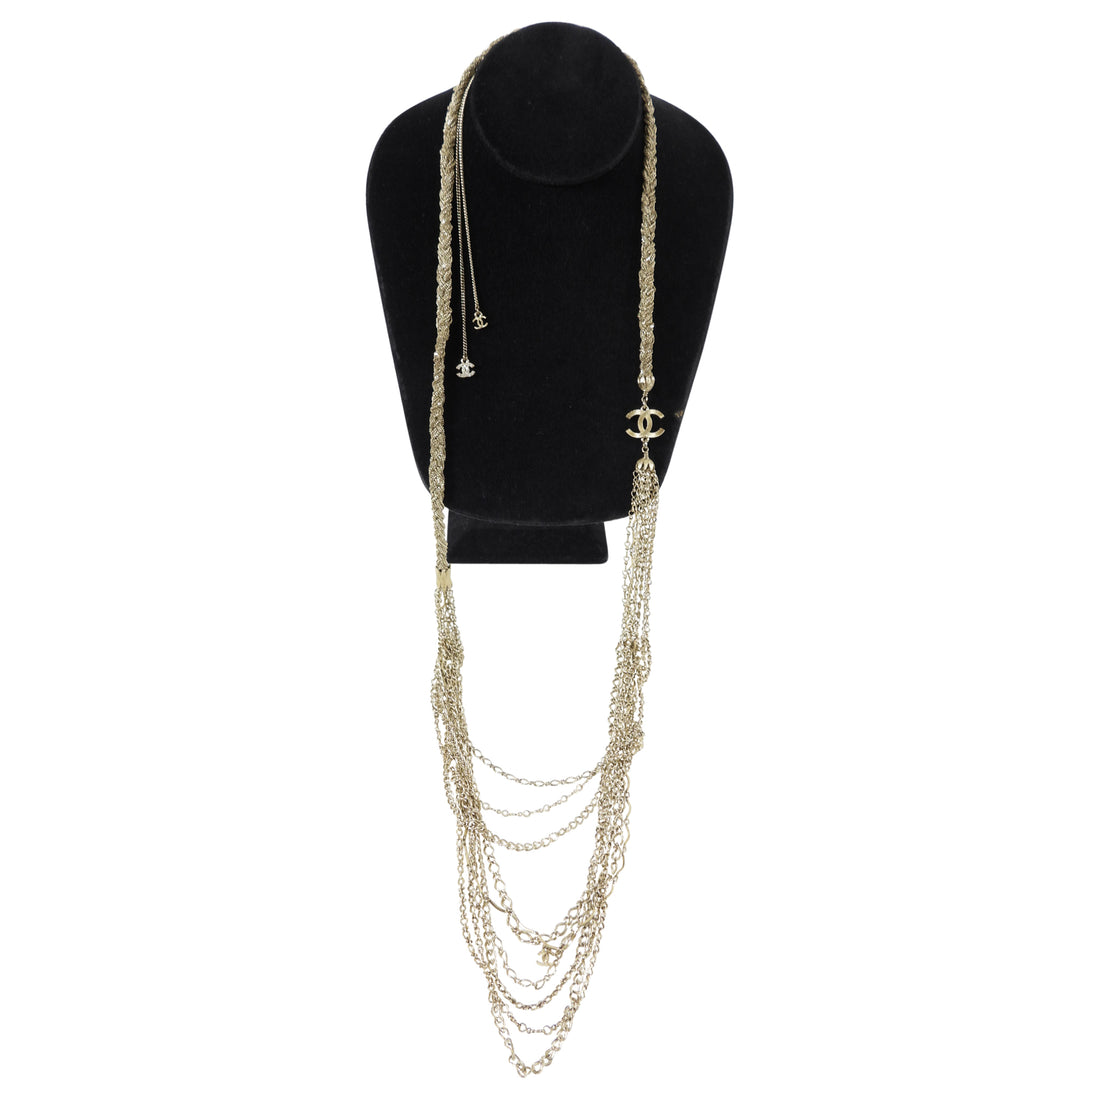 Chanel 10P Goldtone Chain Braided Layered Long Necklace – I MISS YOU VINTAGE